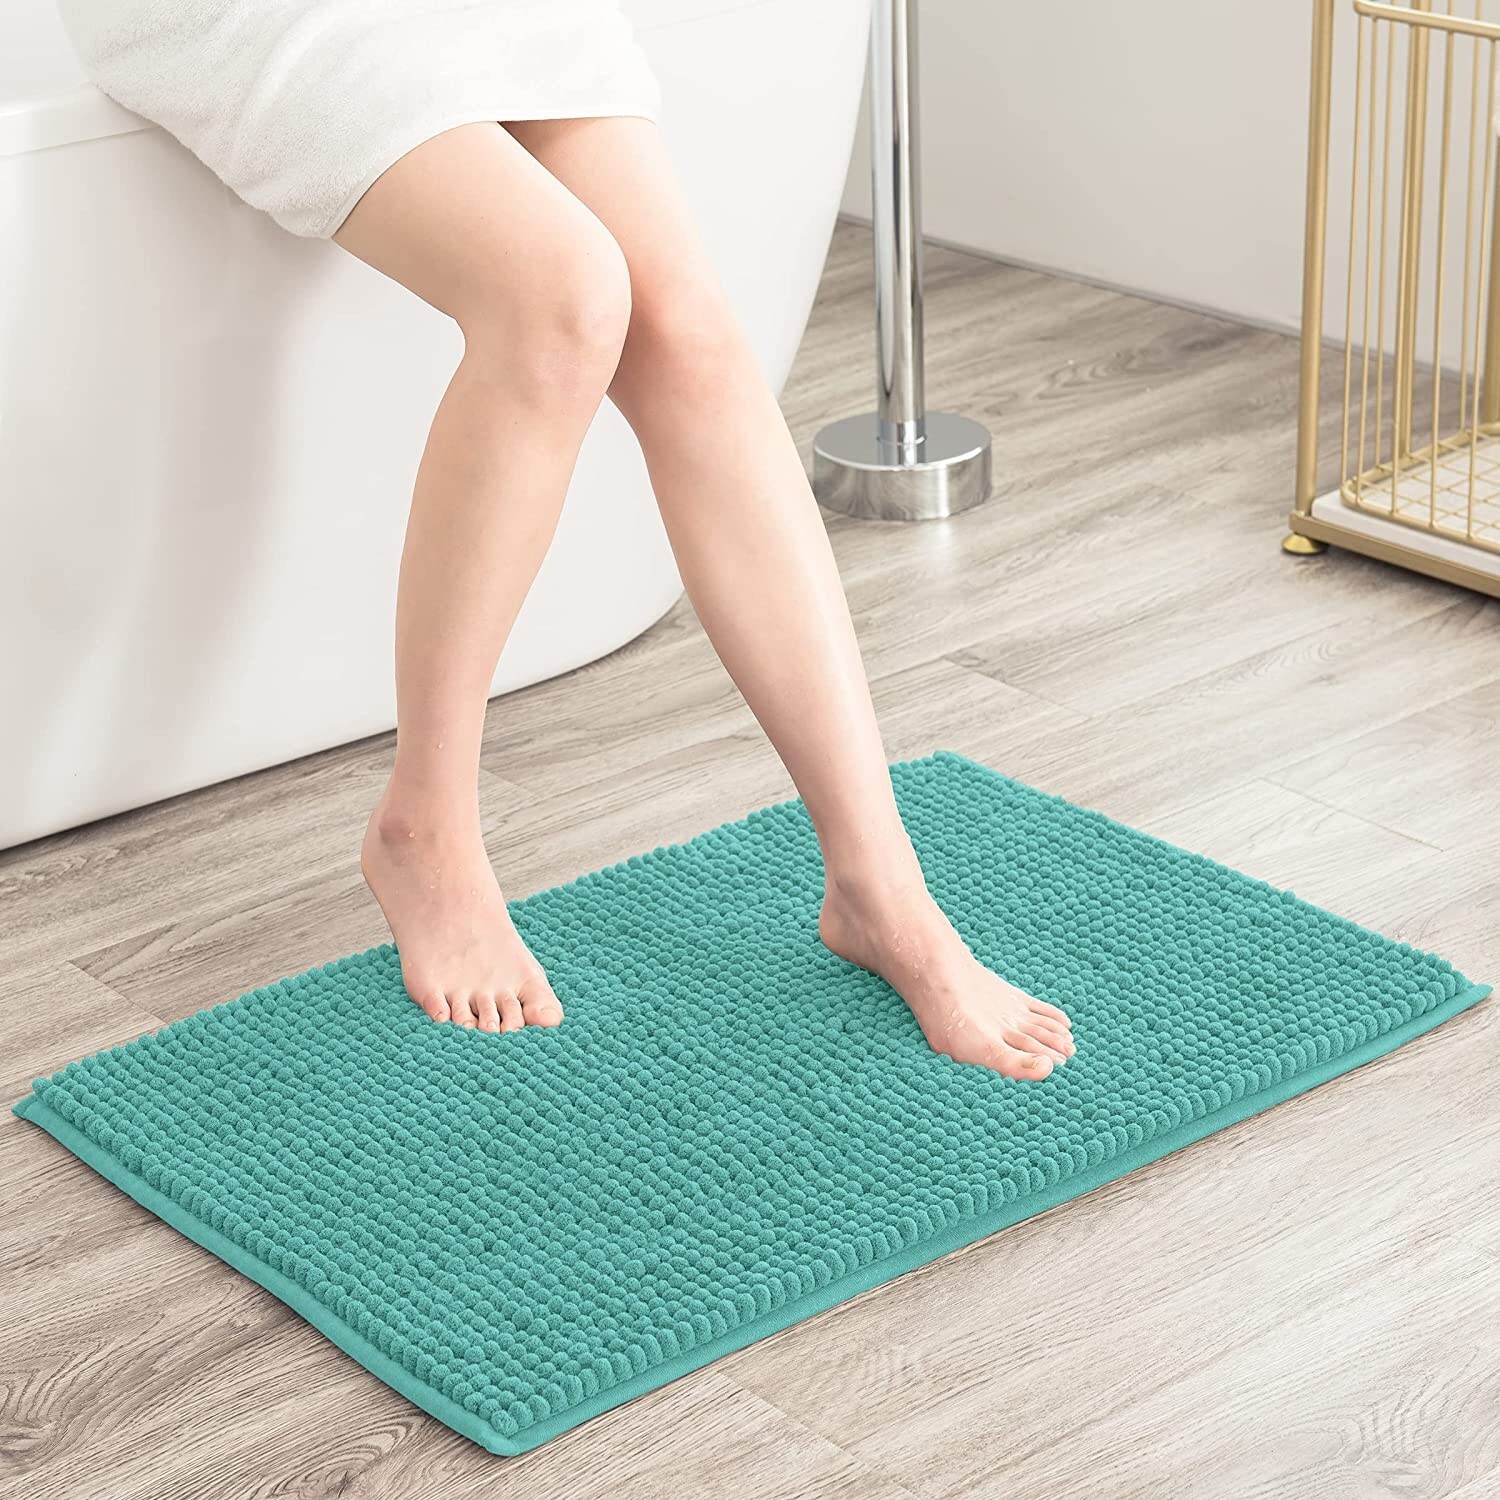 Bathroom Rugs Soft Non Slip Absorbent Memory Foam Bath Mat Extra Large Size  Runner Long Rug for Bath Room Shower Tub Floors Mats 24 inches X 71 inches